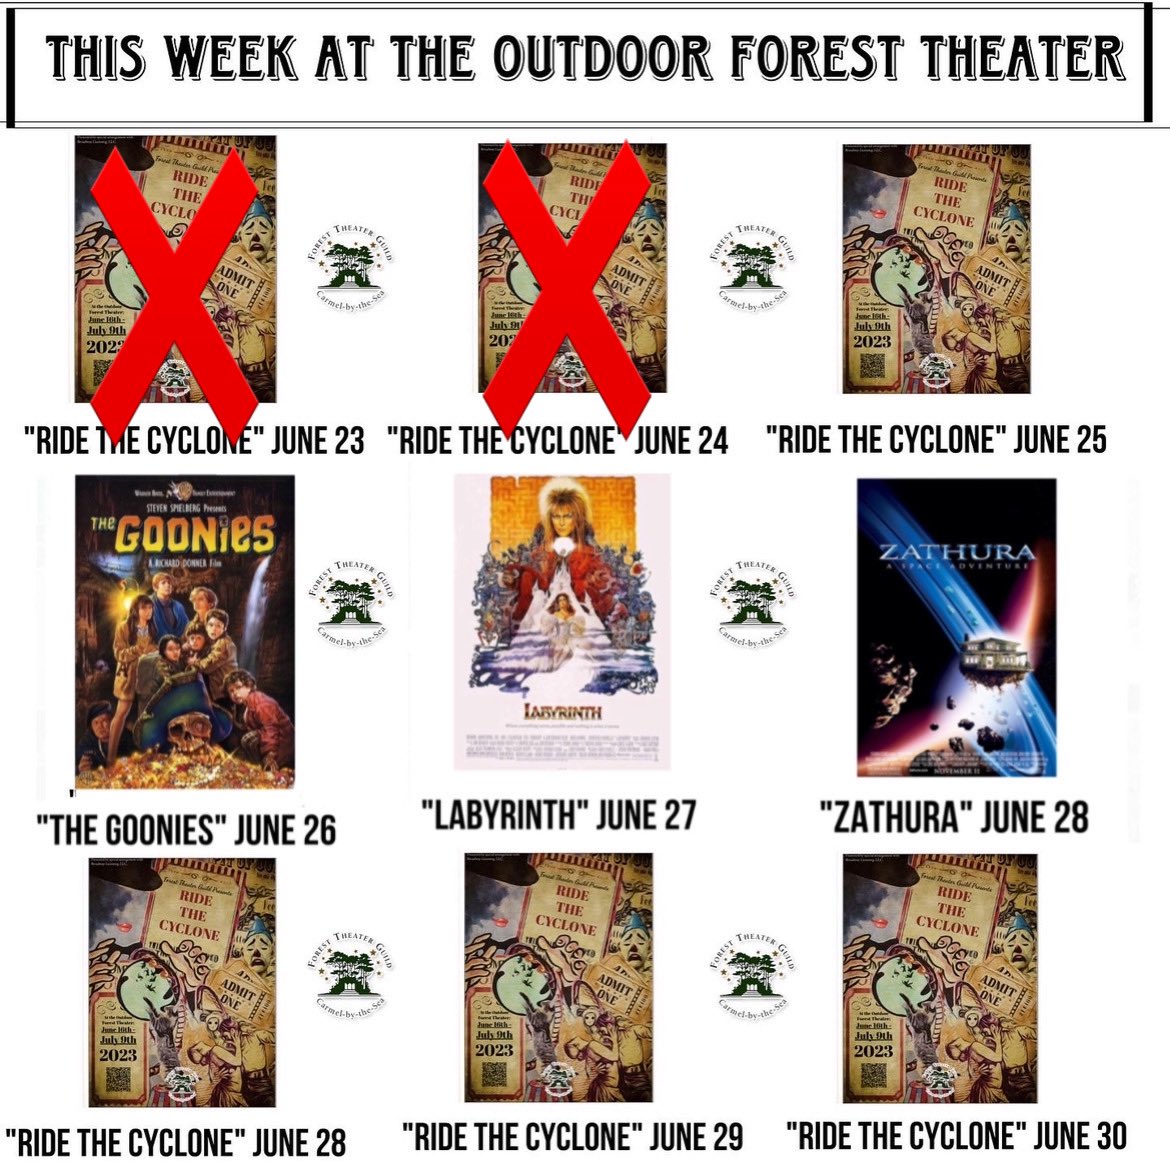 Here’s what’s next! Make sure you come see Ride the Cyclone today, tickets linked in website🎢 #ridethecyclone #filmsintheforest #foresttheaterguild #carmelbythesea